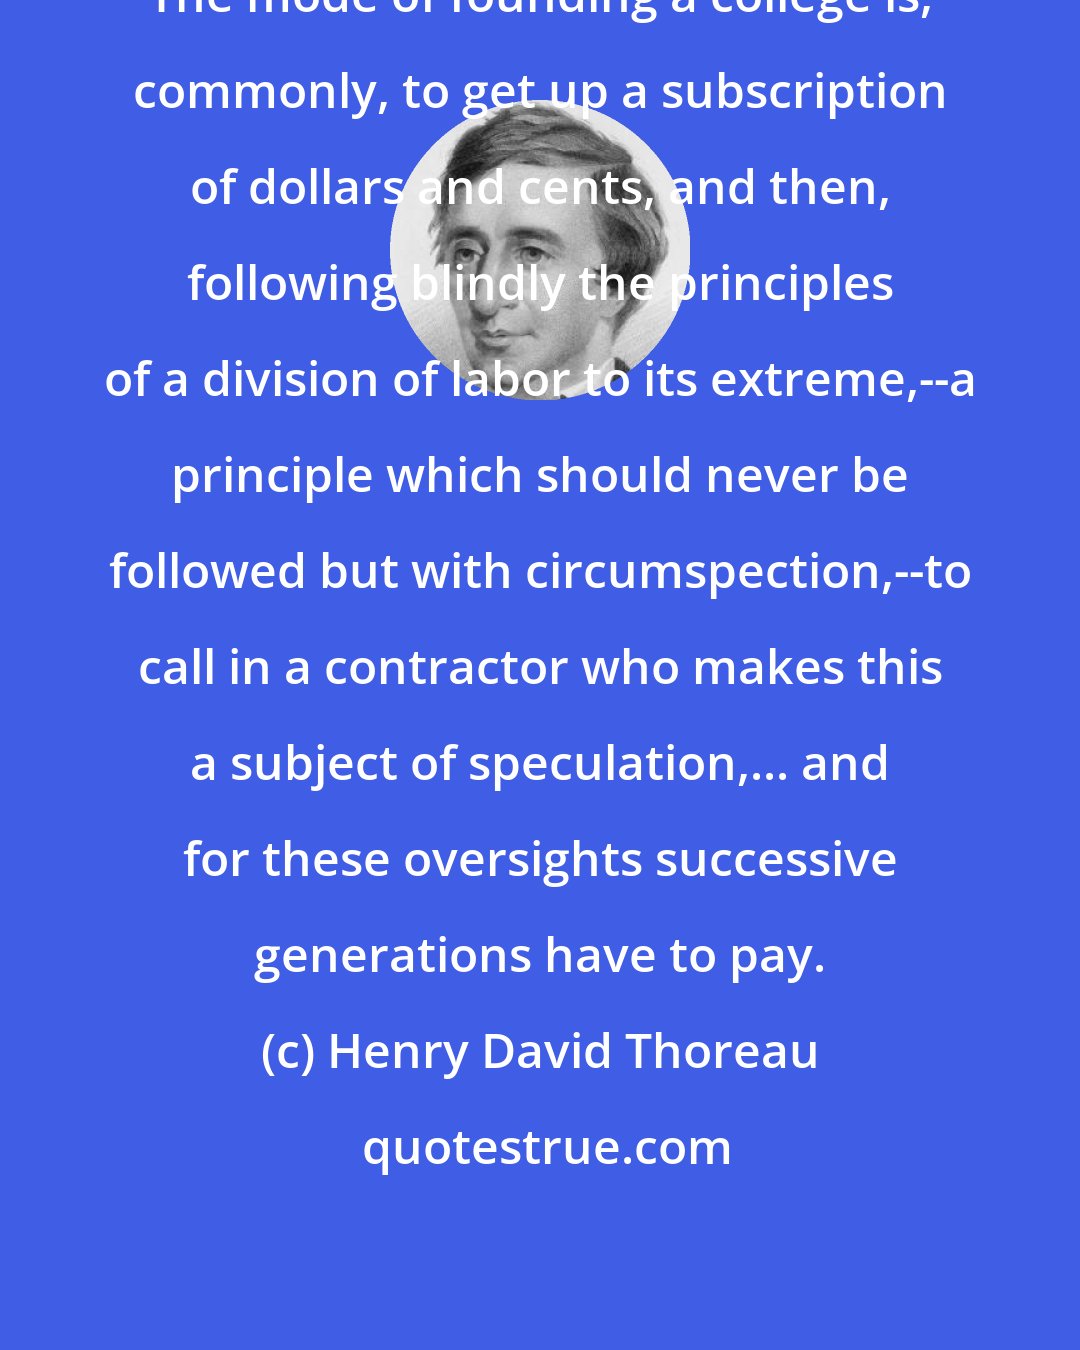 Henry David Thoreau: The mode of founding a college is, commonly, to get up a subscription of dollars and cents, and then, following blindly the principles of a division of labor to its extreme,--a principle which should never be followed but with circumspection,--to call in a contractor who makes this a subject of speculation,... and for these oversights successive generations have to pay.